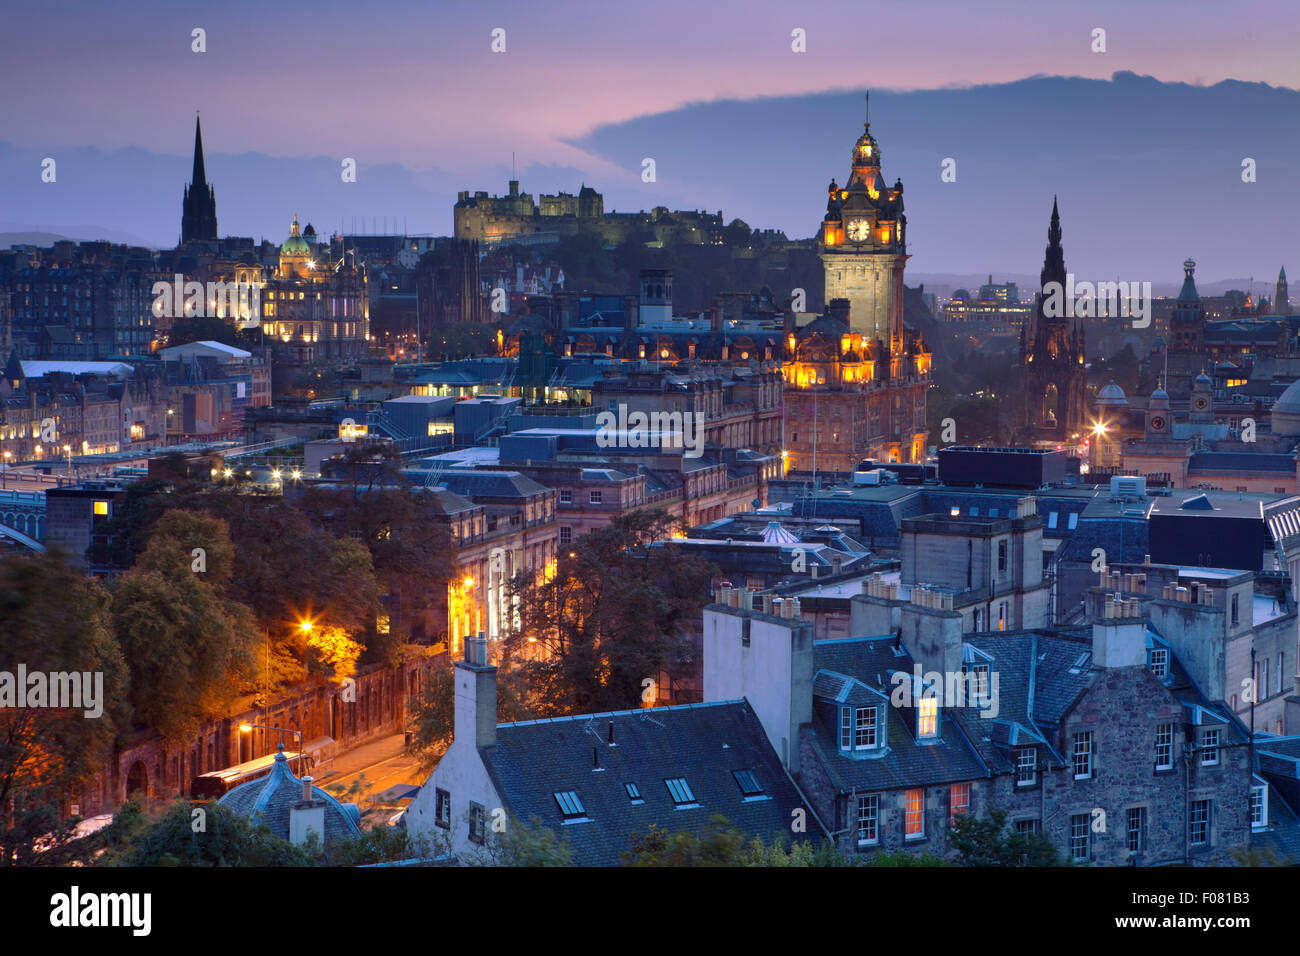 The Edinburgh skyline with the Edinburgh castle in the background. Photographed from Calton Hill just after sunset. Stock Photo